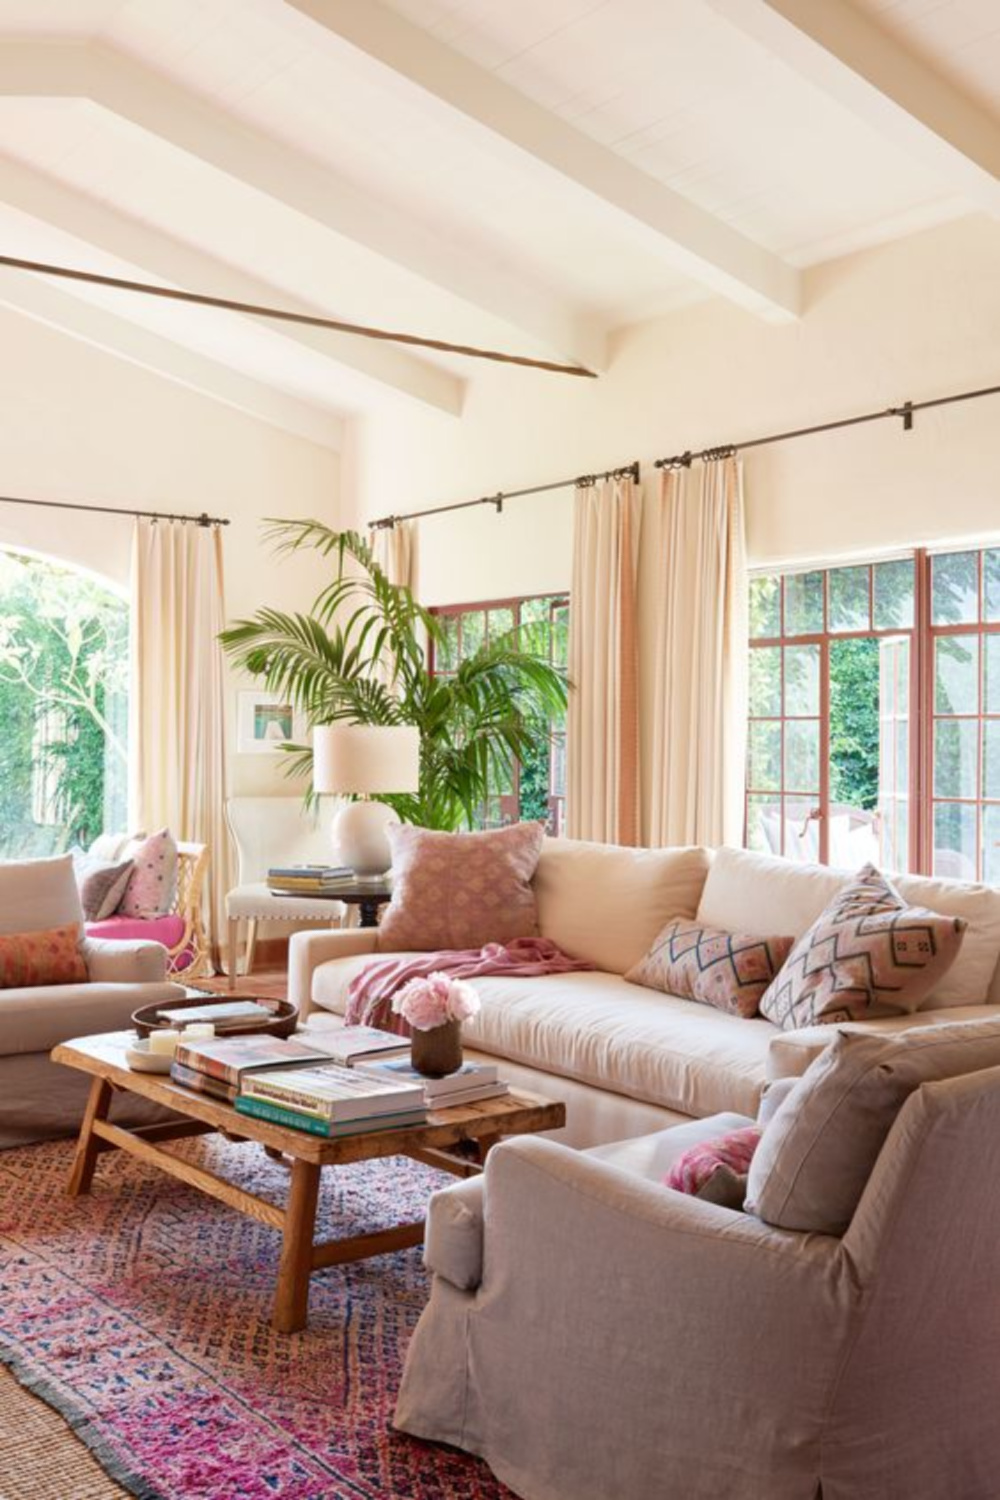 Reese Witherspoon's House in "Home Again" Movie. A pretty living room with California happy chic, linen furniture, and pops of pink. It's actually the living room in the Spanish hacienda of Reese Witherspoon's House in HOME AGAIN. #livingroom #california #reesewitherspoon #homeagain